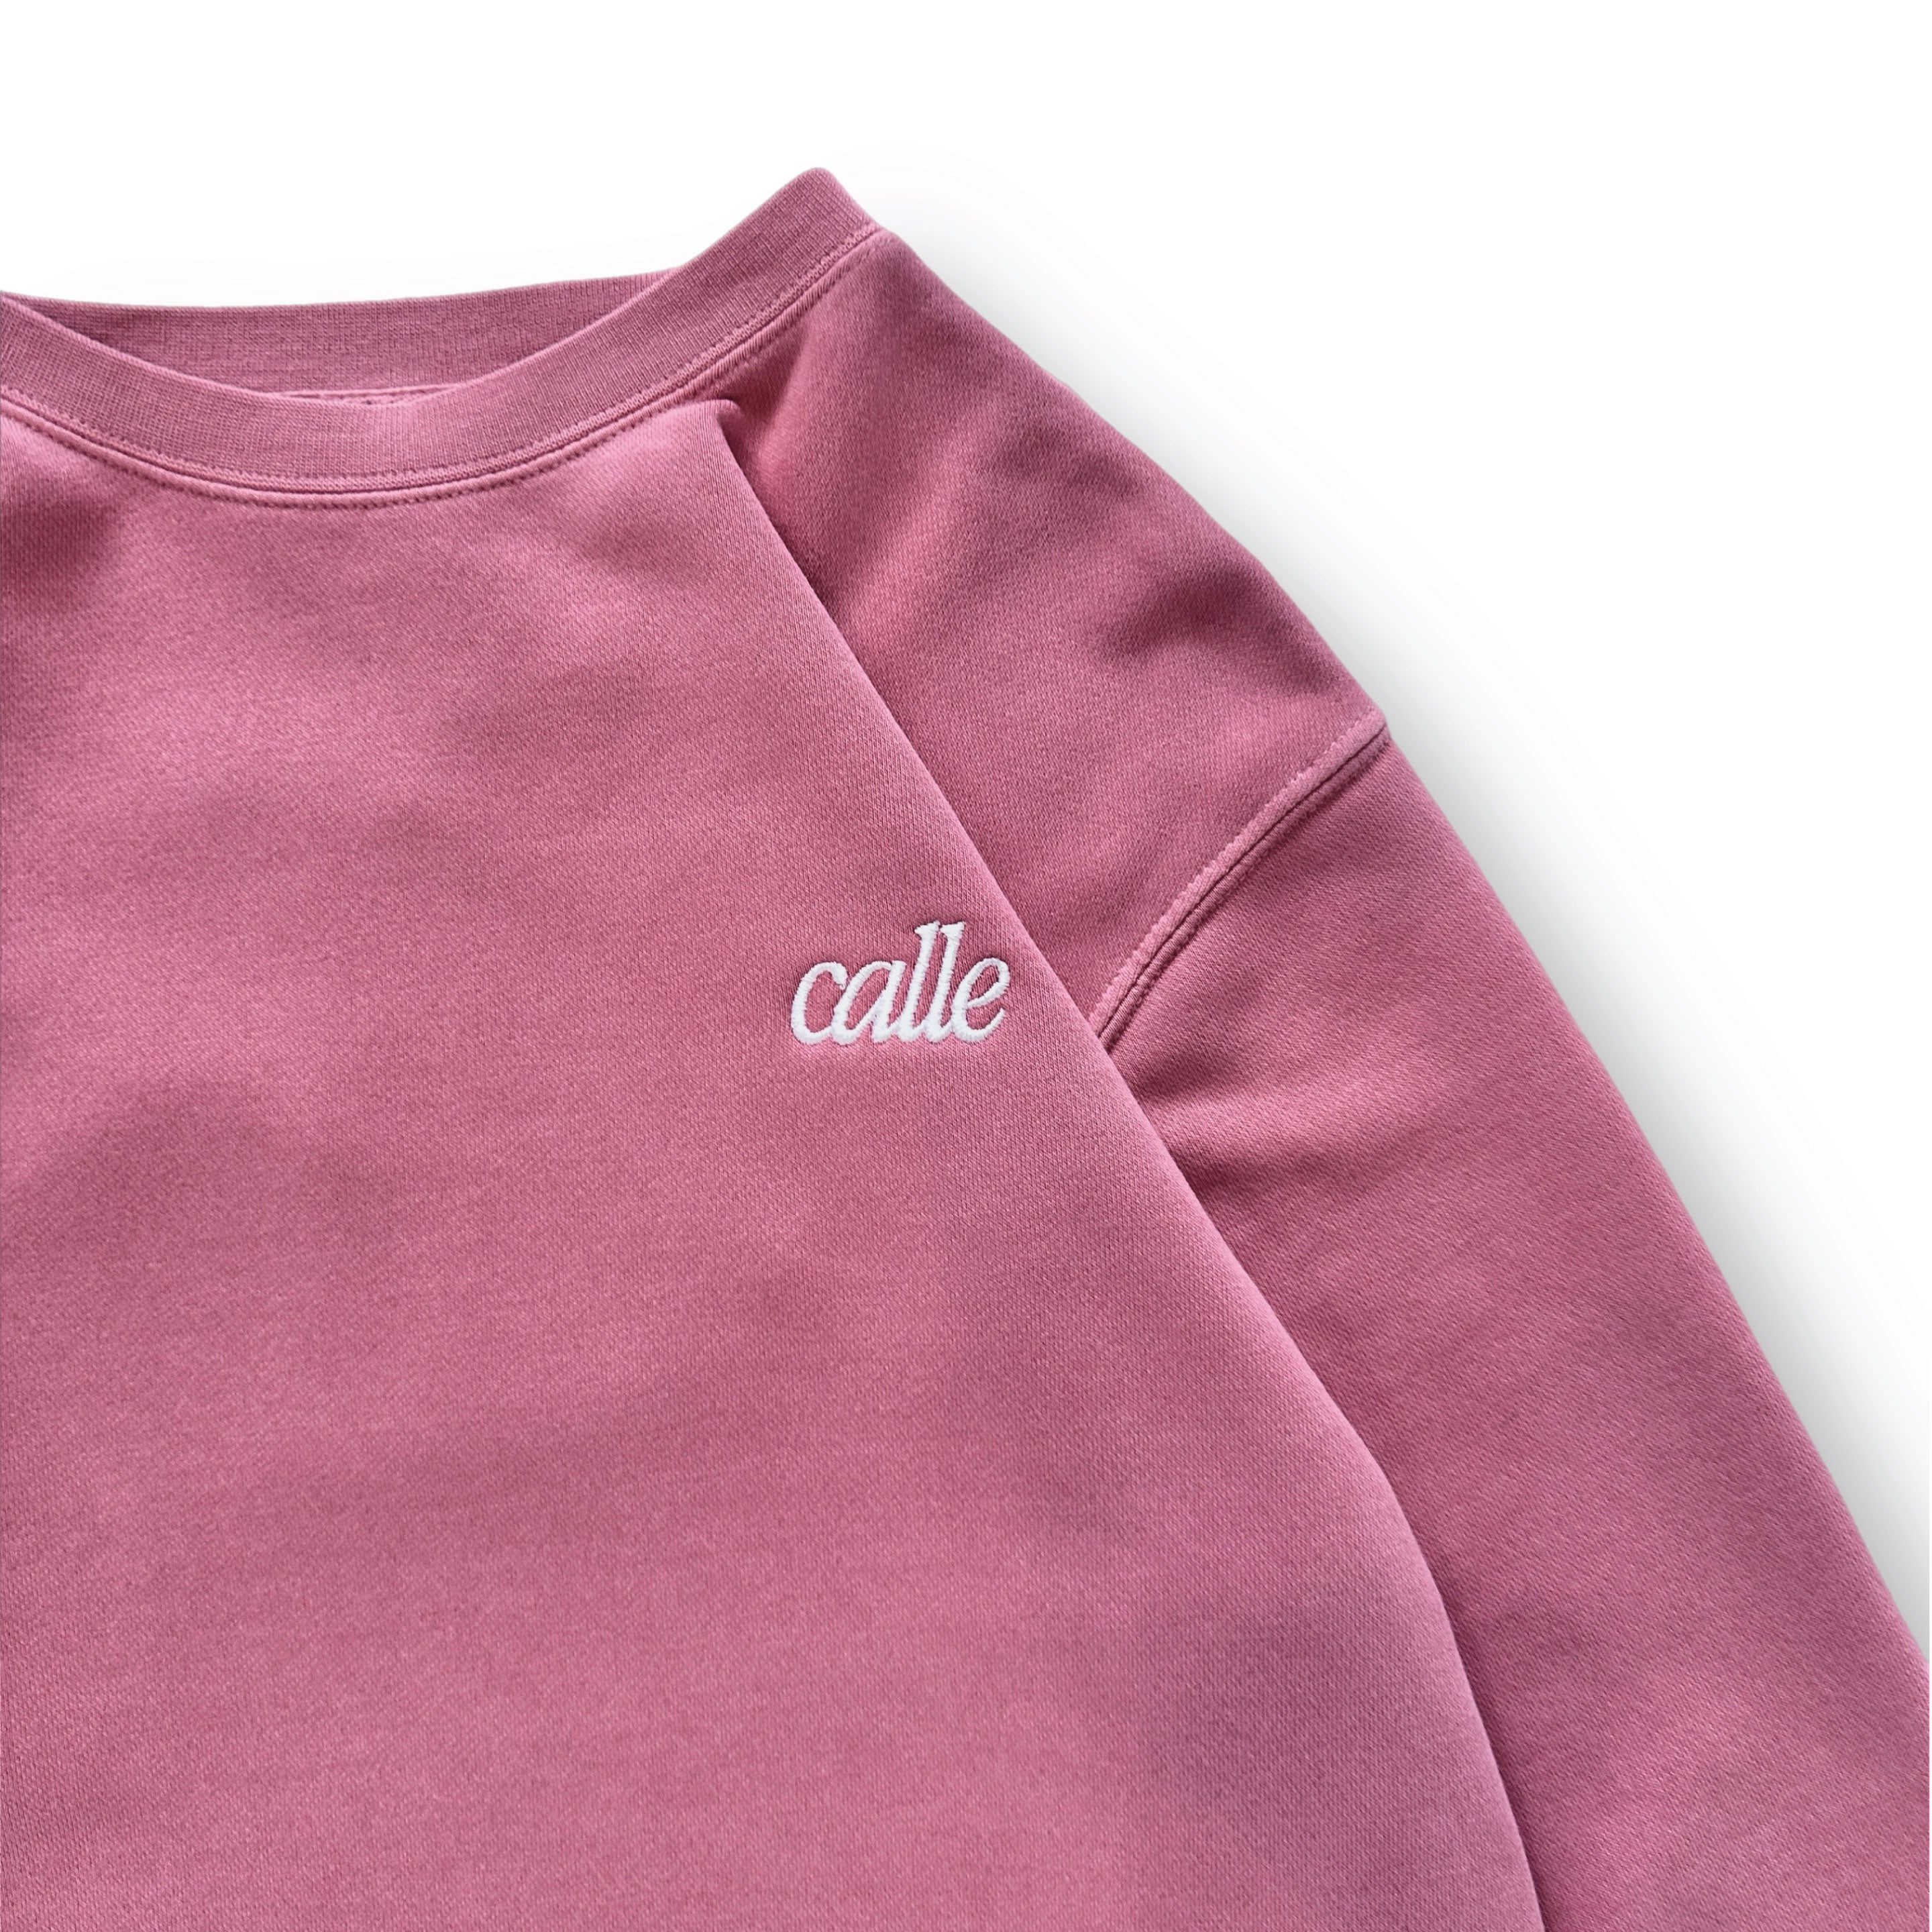 Faded Embroidered Calle Crew - Pink